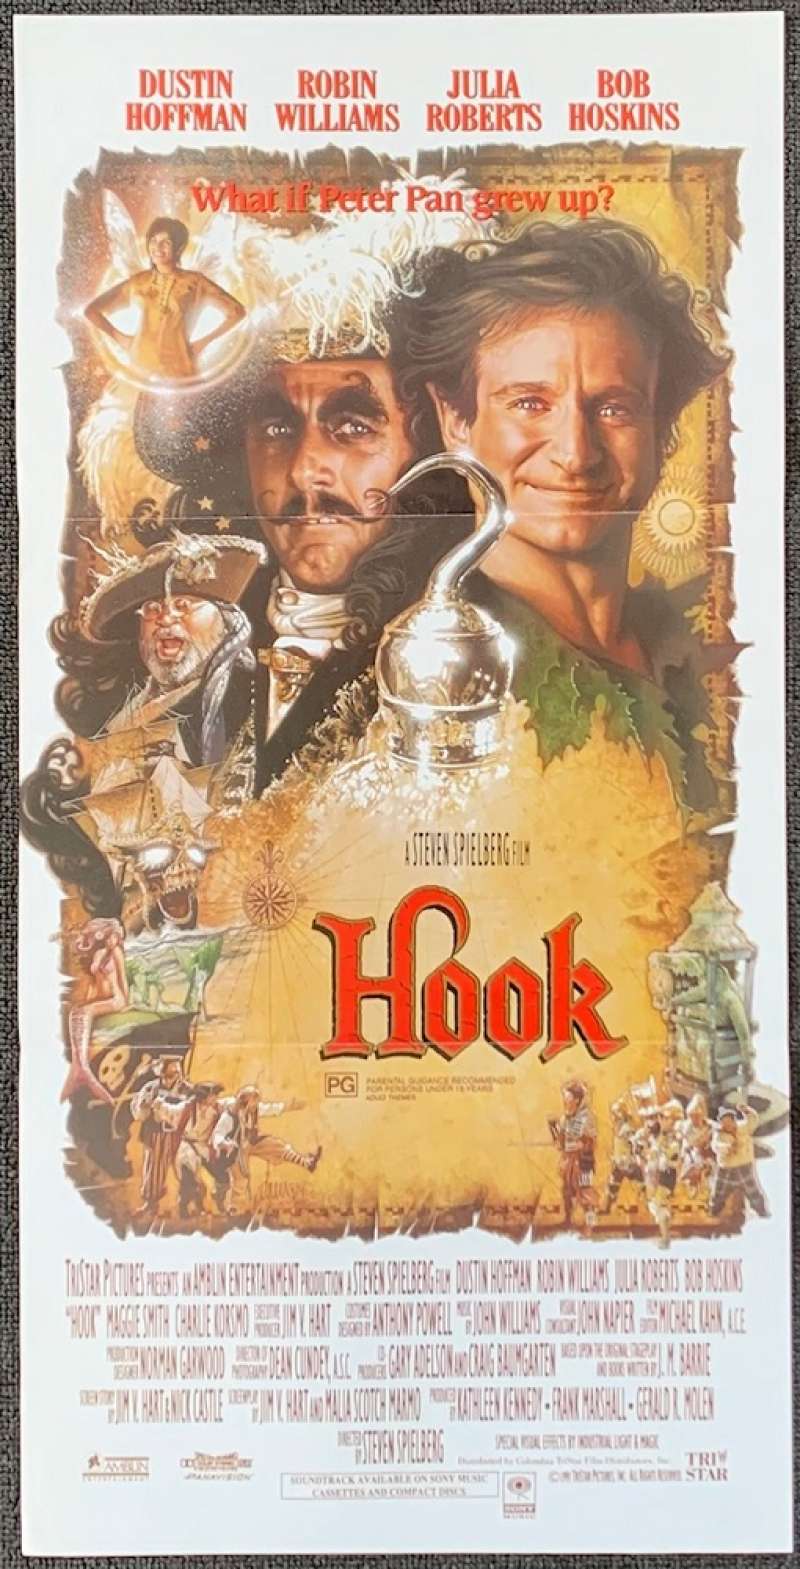 Hook movie poster : 12 x 16 inches - Peter Pan poster, Robin Williams  poster 